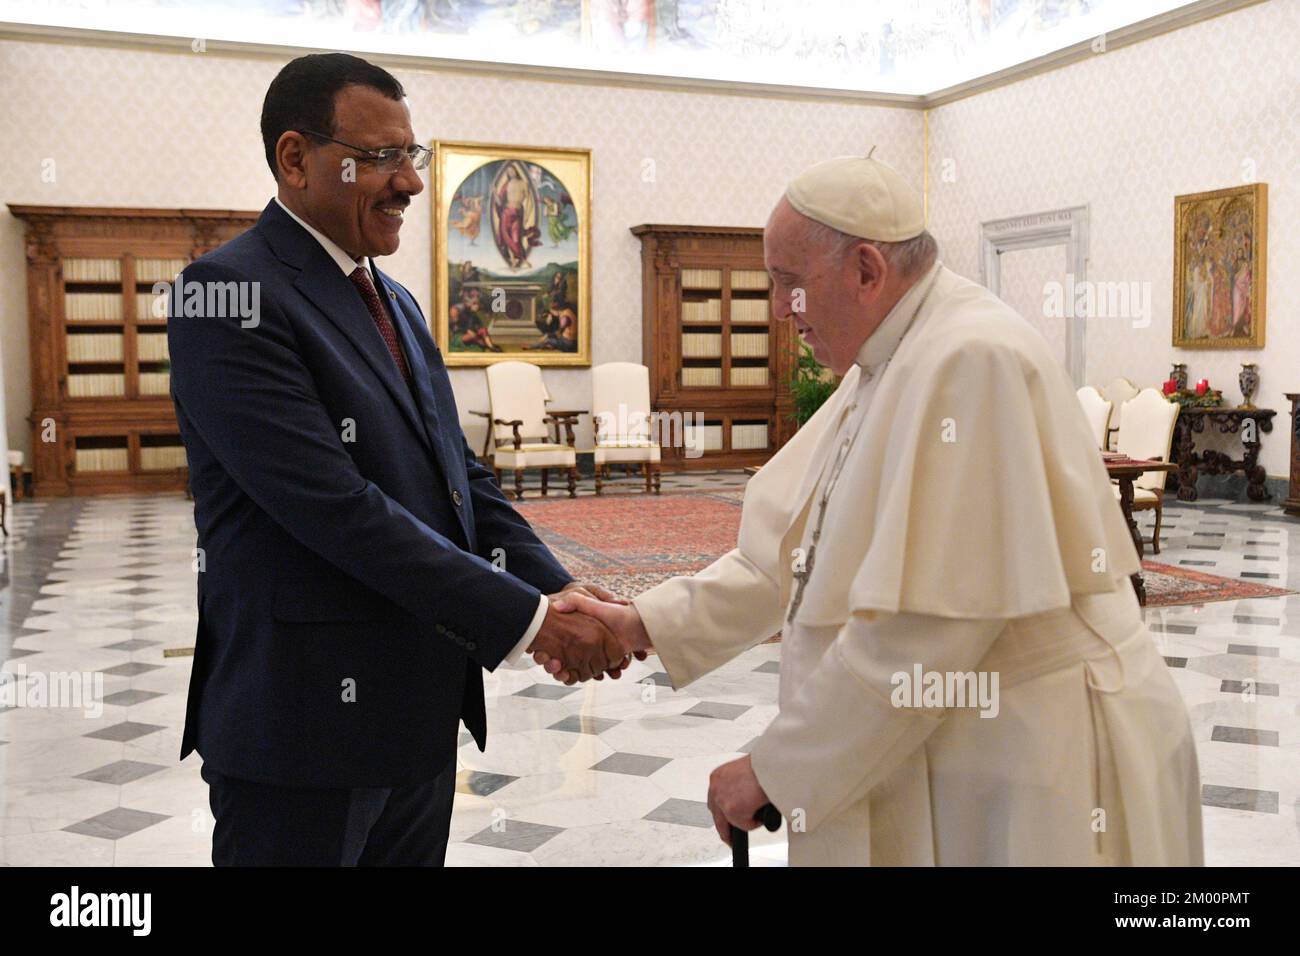 Vatican, Vatican. 03rd Dec, 2022. Italy, Rome, Vatican, 22/12/3 Pope Francis receives Mr. Mohamed Bazoum, President of the Republic of Niger in private audience at Vatican Photograph byVatican Media /Catholic Press Photo. RESTRICTED TO EDITORIAL USE - NO MARKETING - NO ADVERTISING CAMPAIGNS Credit: Independent Photo Agency/Alamy Live News Stock Photo